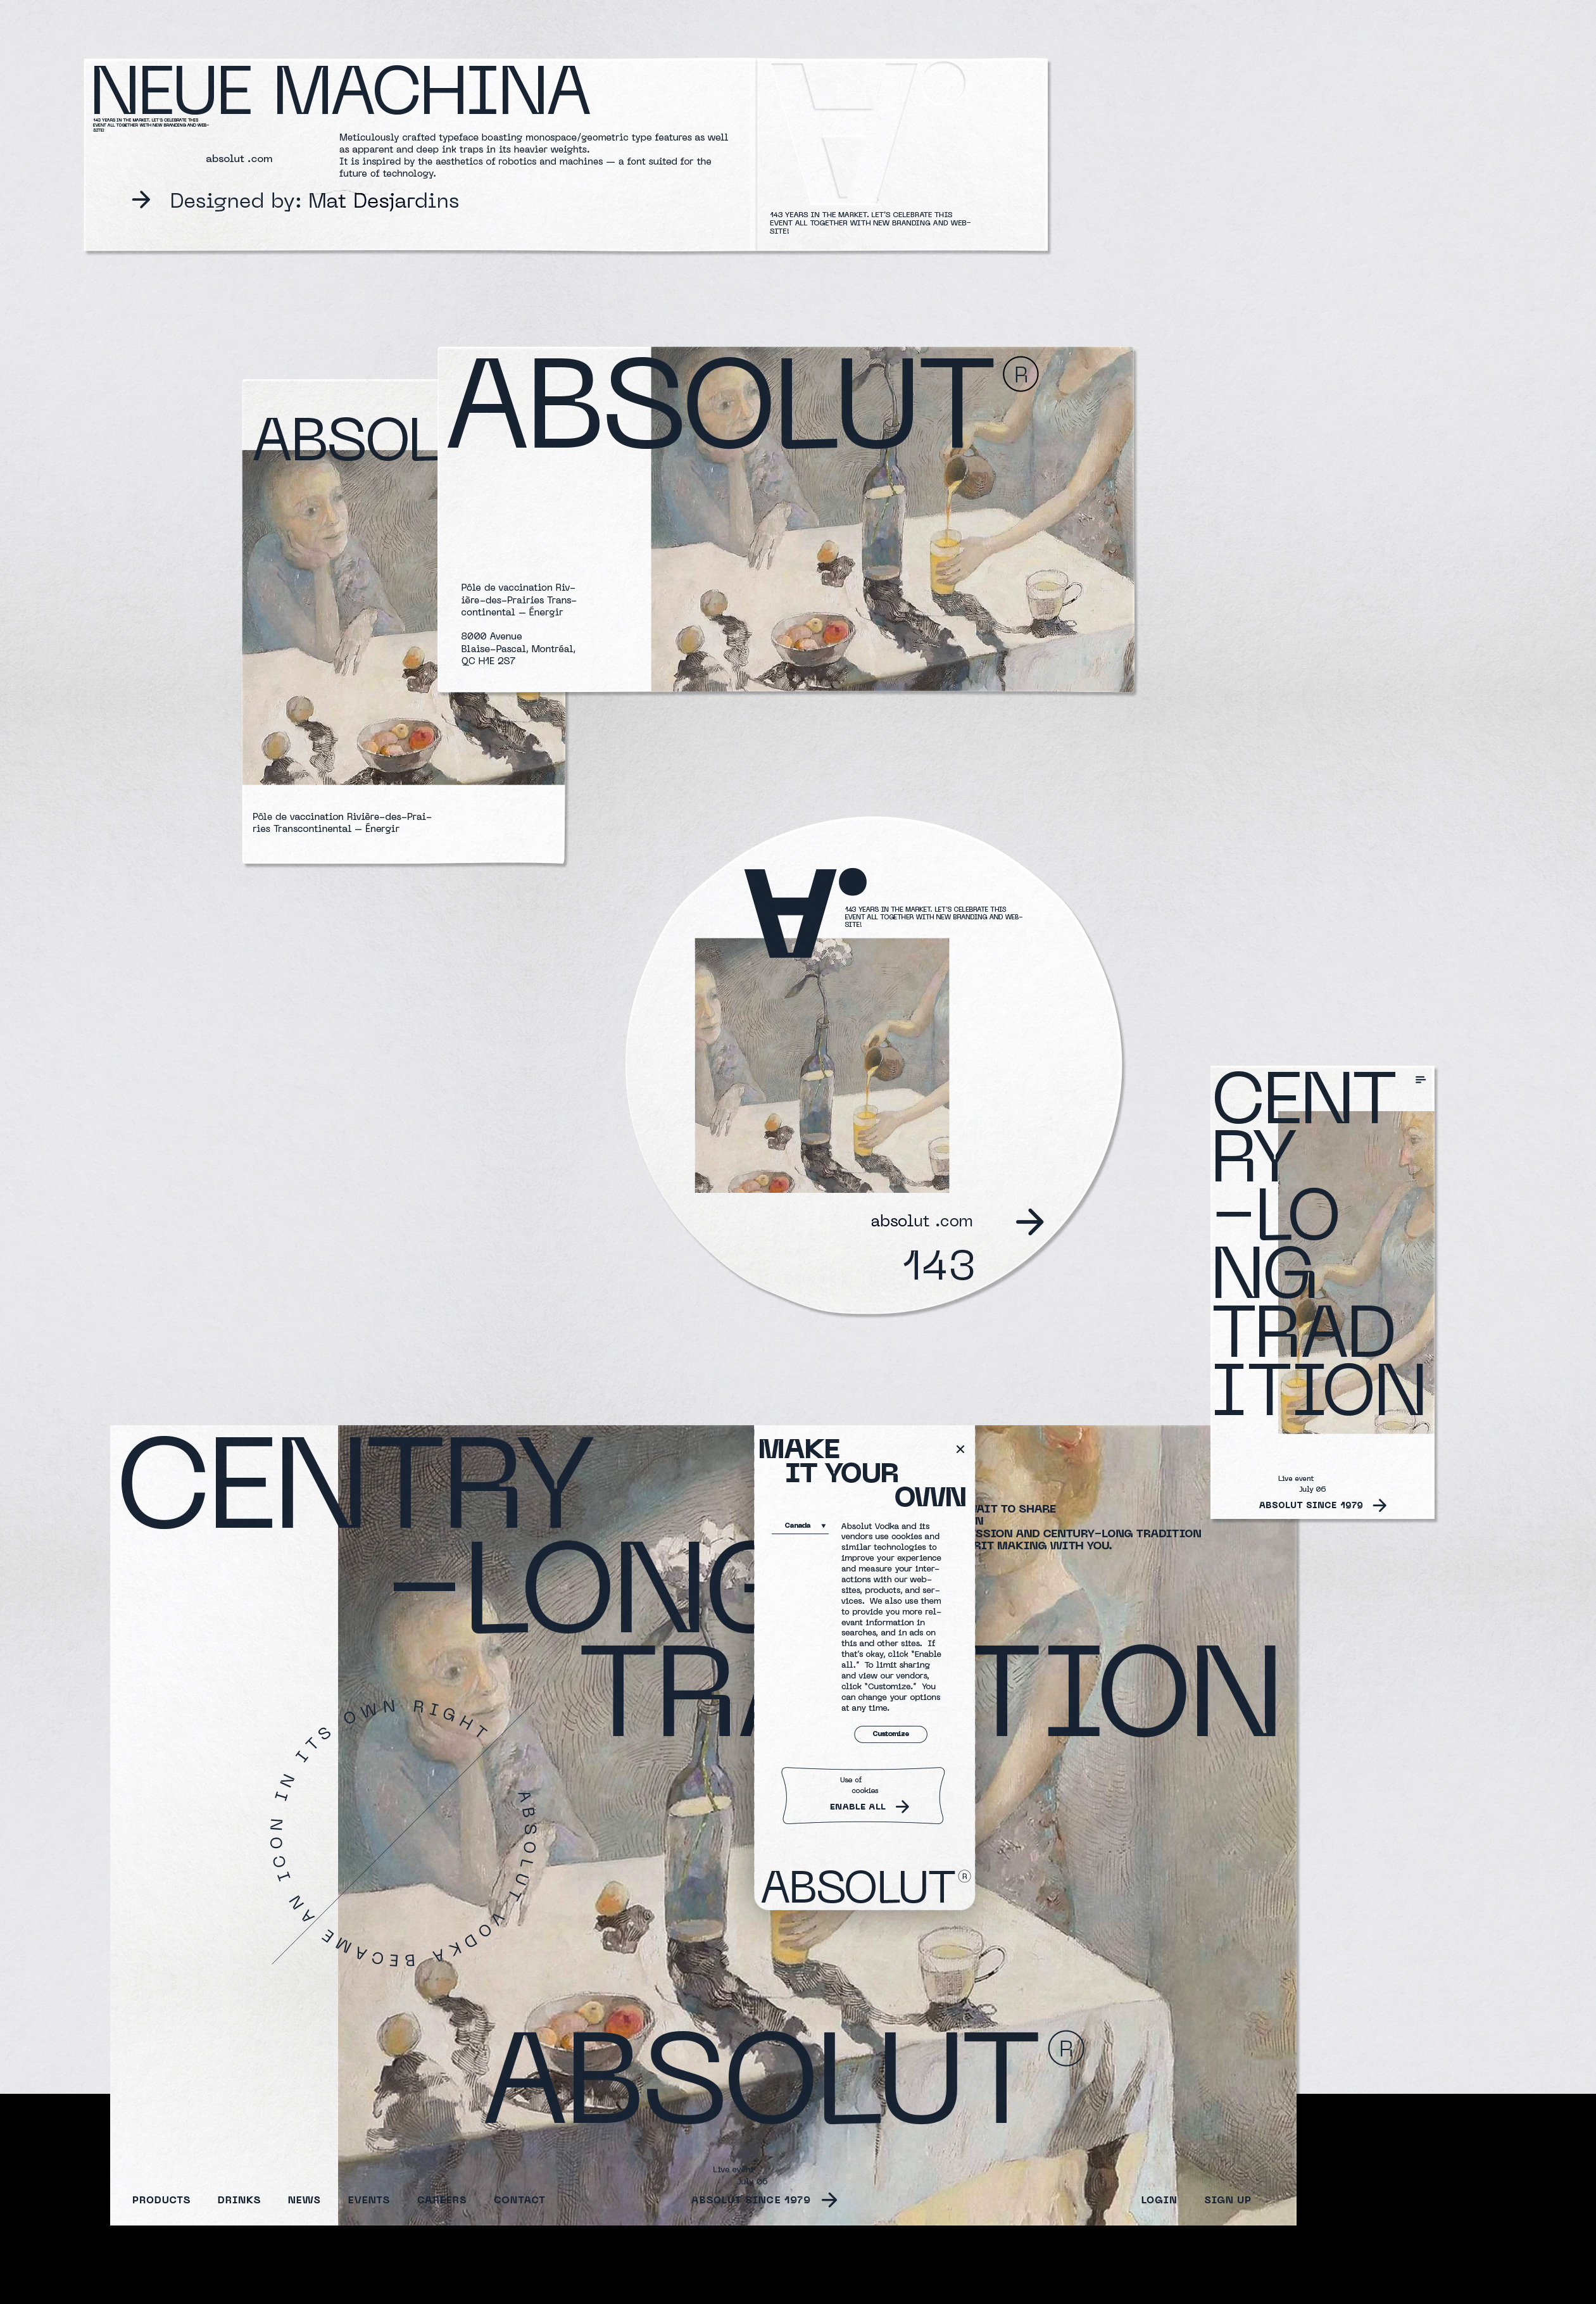 This publication is showing the working process on choosing the right font for the Absolut thru Zabarsky project. I have chosen five typefaces and designed this page to showcase how significant a font can affect the composition